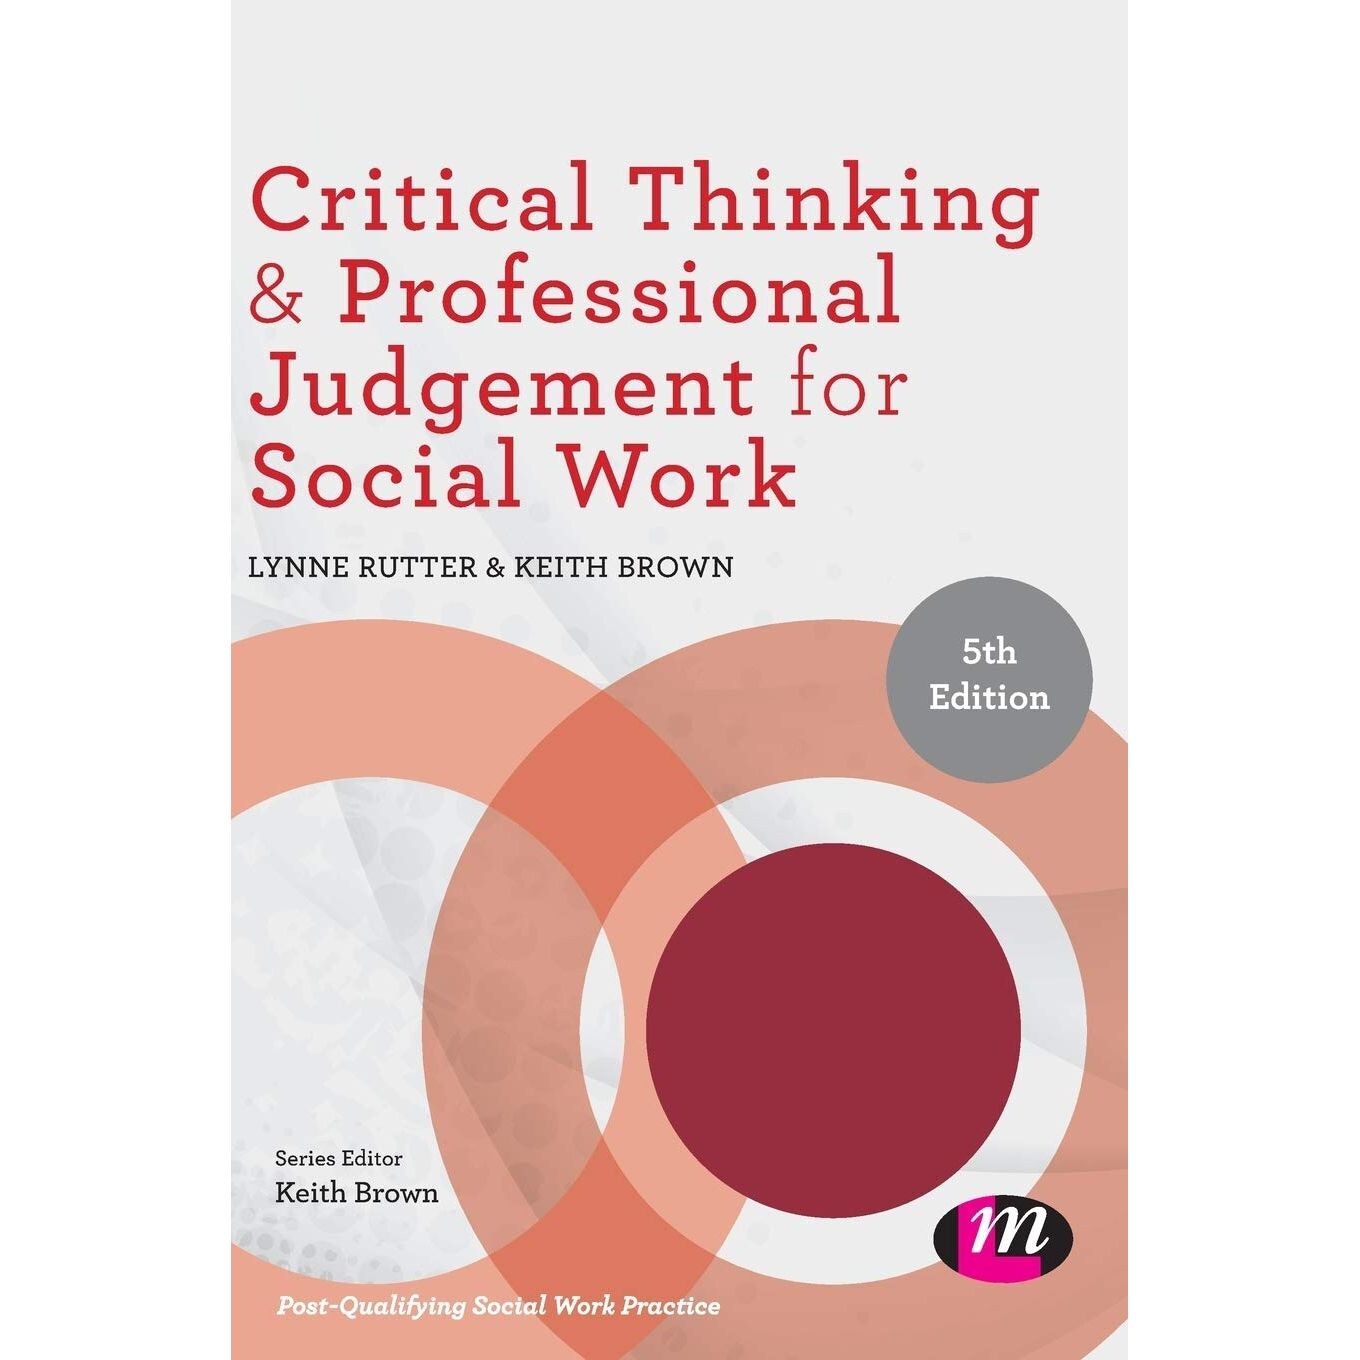 critical thinking in social work